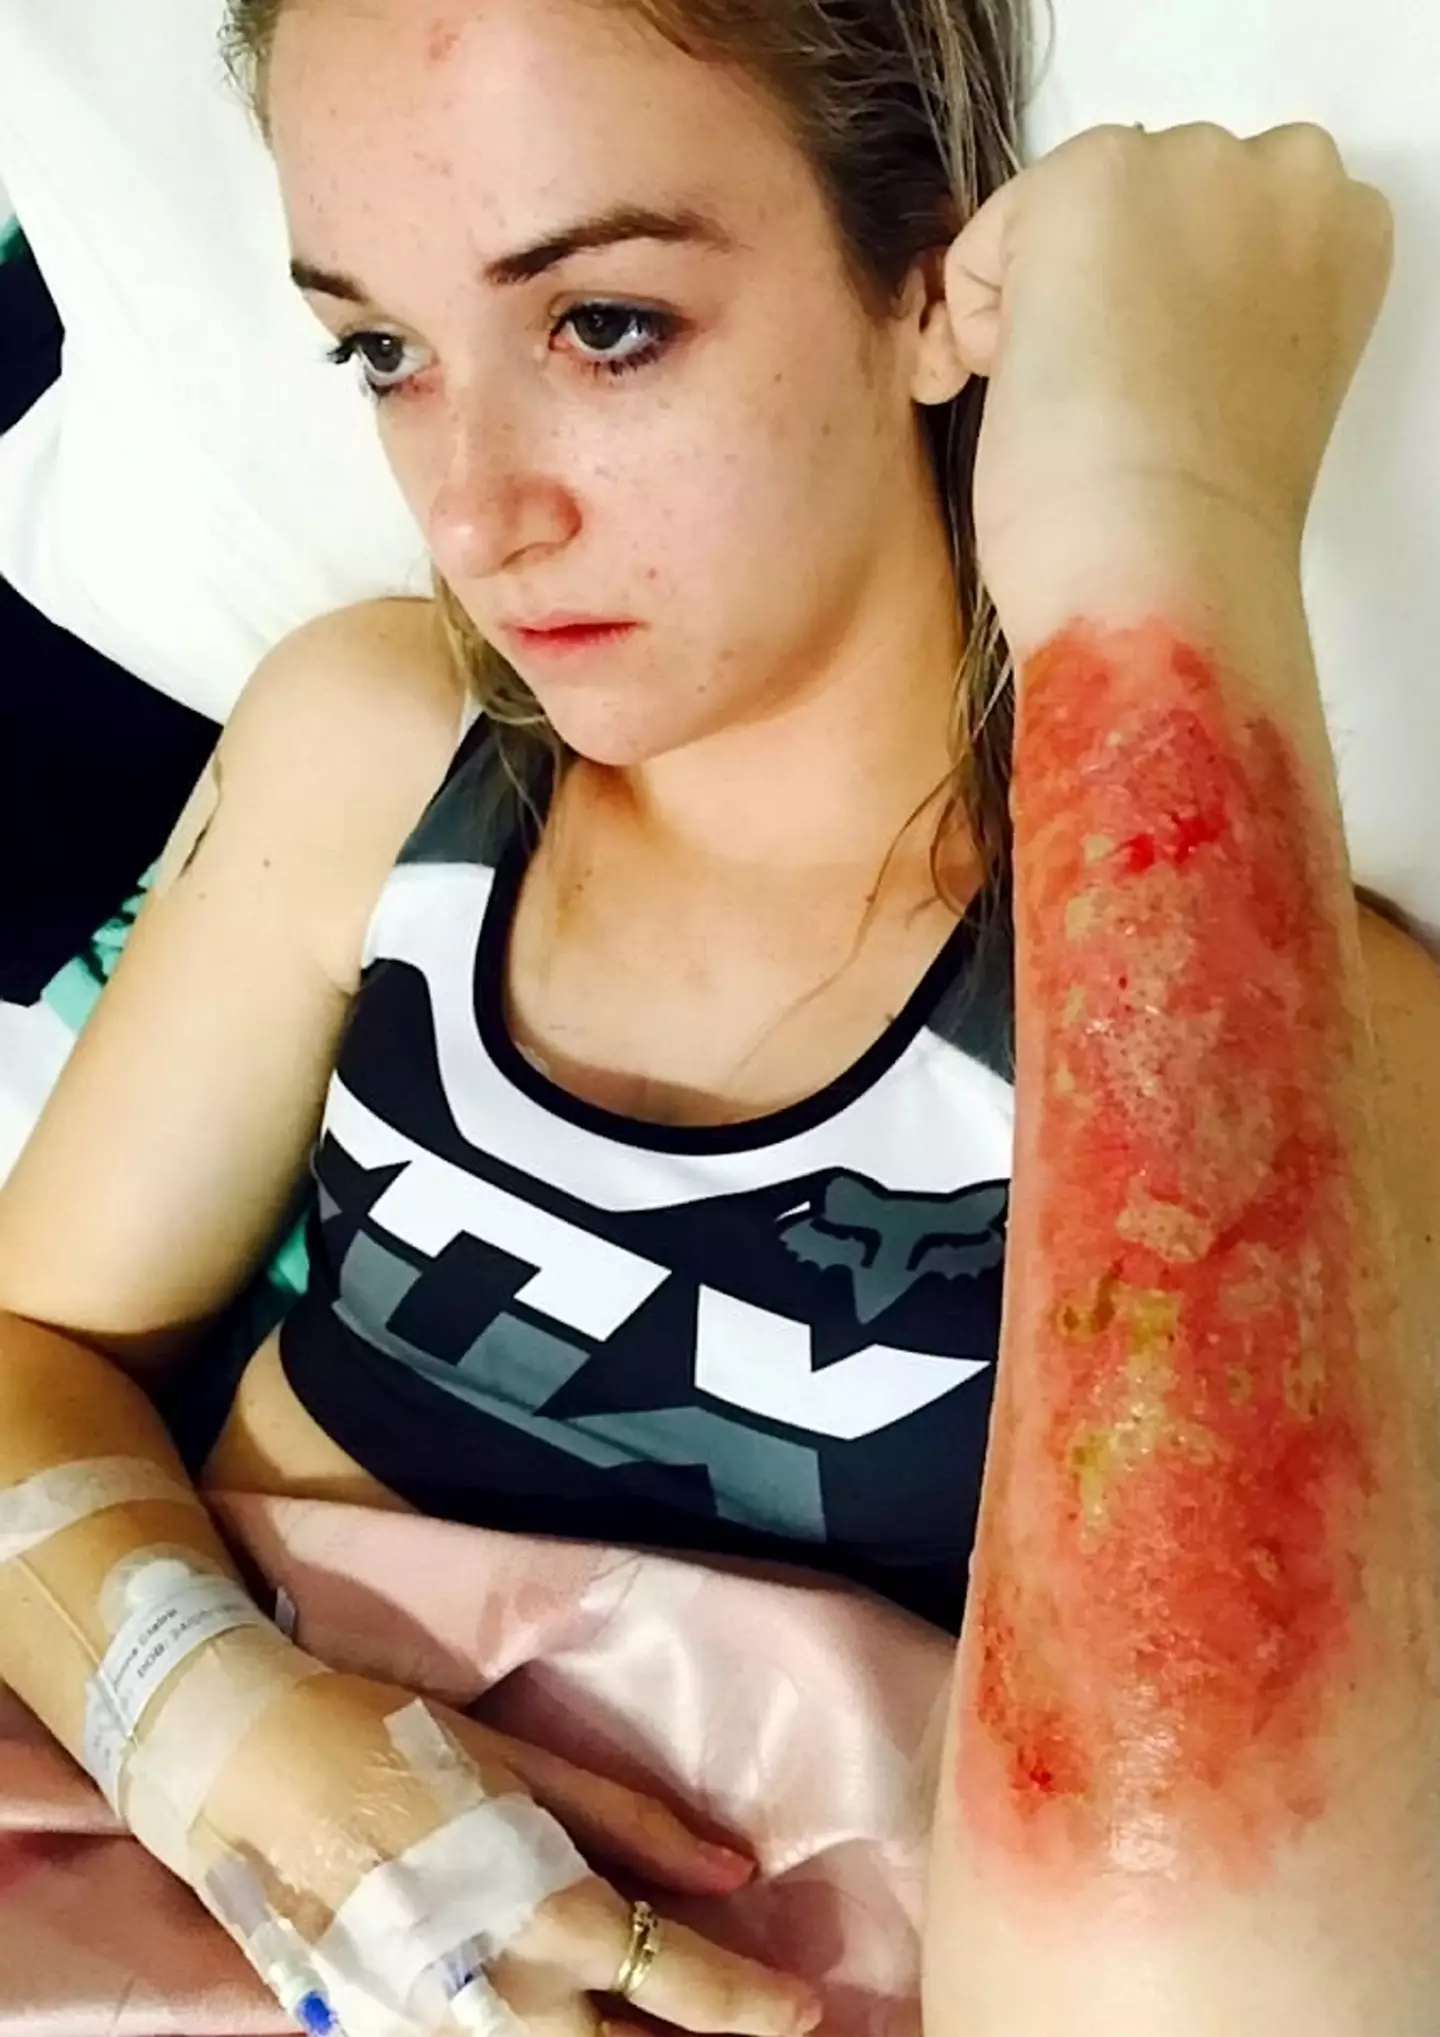 The mum-of-two had a skin graft on her wound but it only worked for a year.